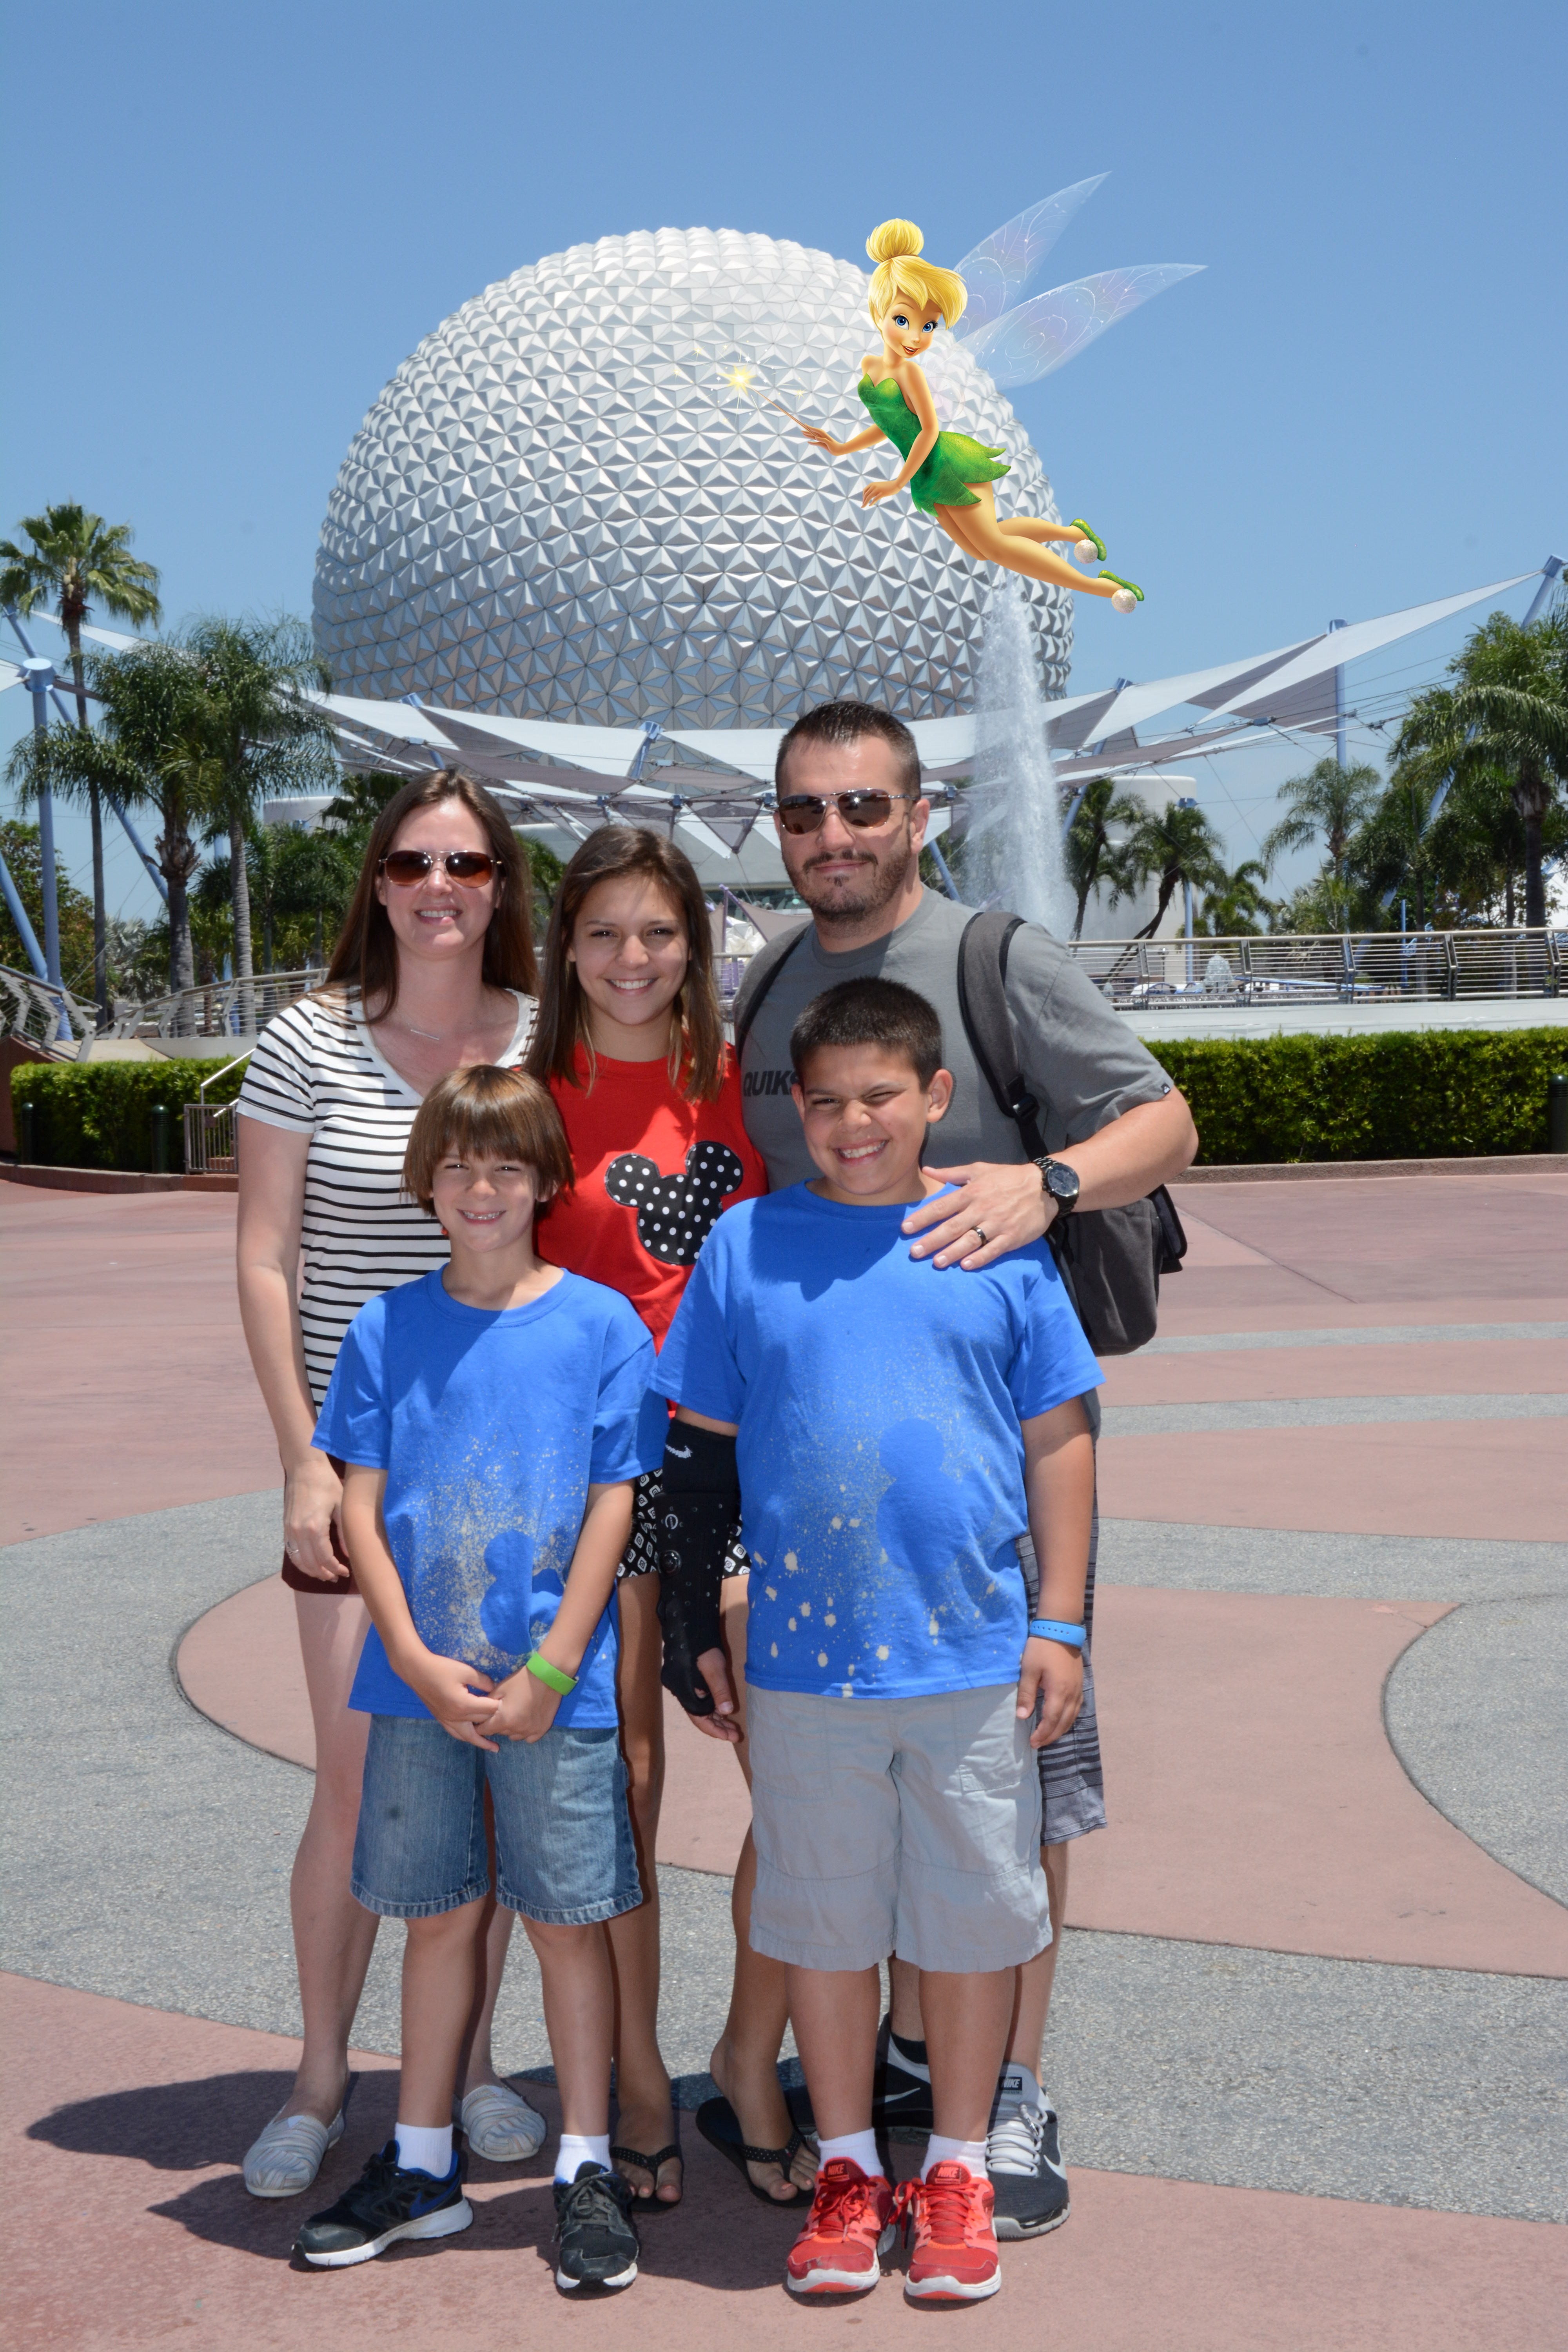 Take advantage of Disney's Photopass service while in the parks and enjoy the benefits of Memory Maker on your Disney vacation.